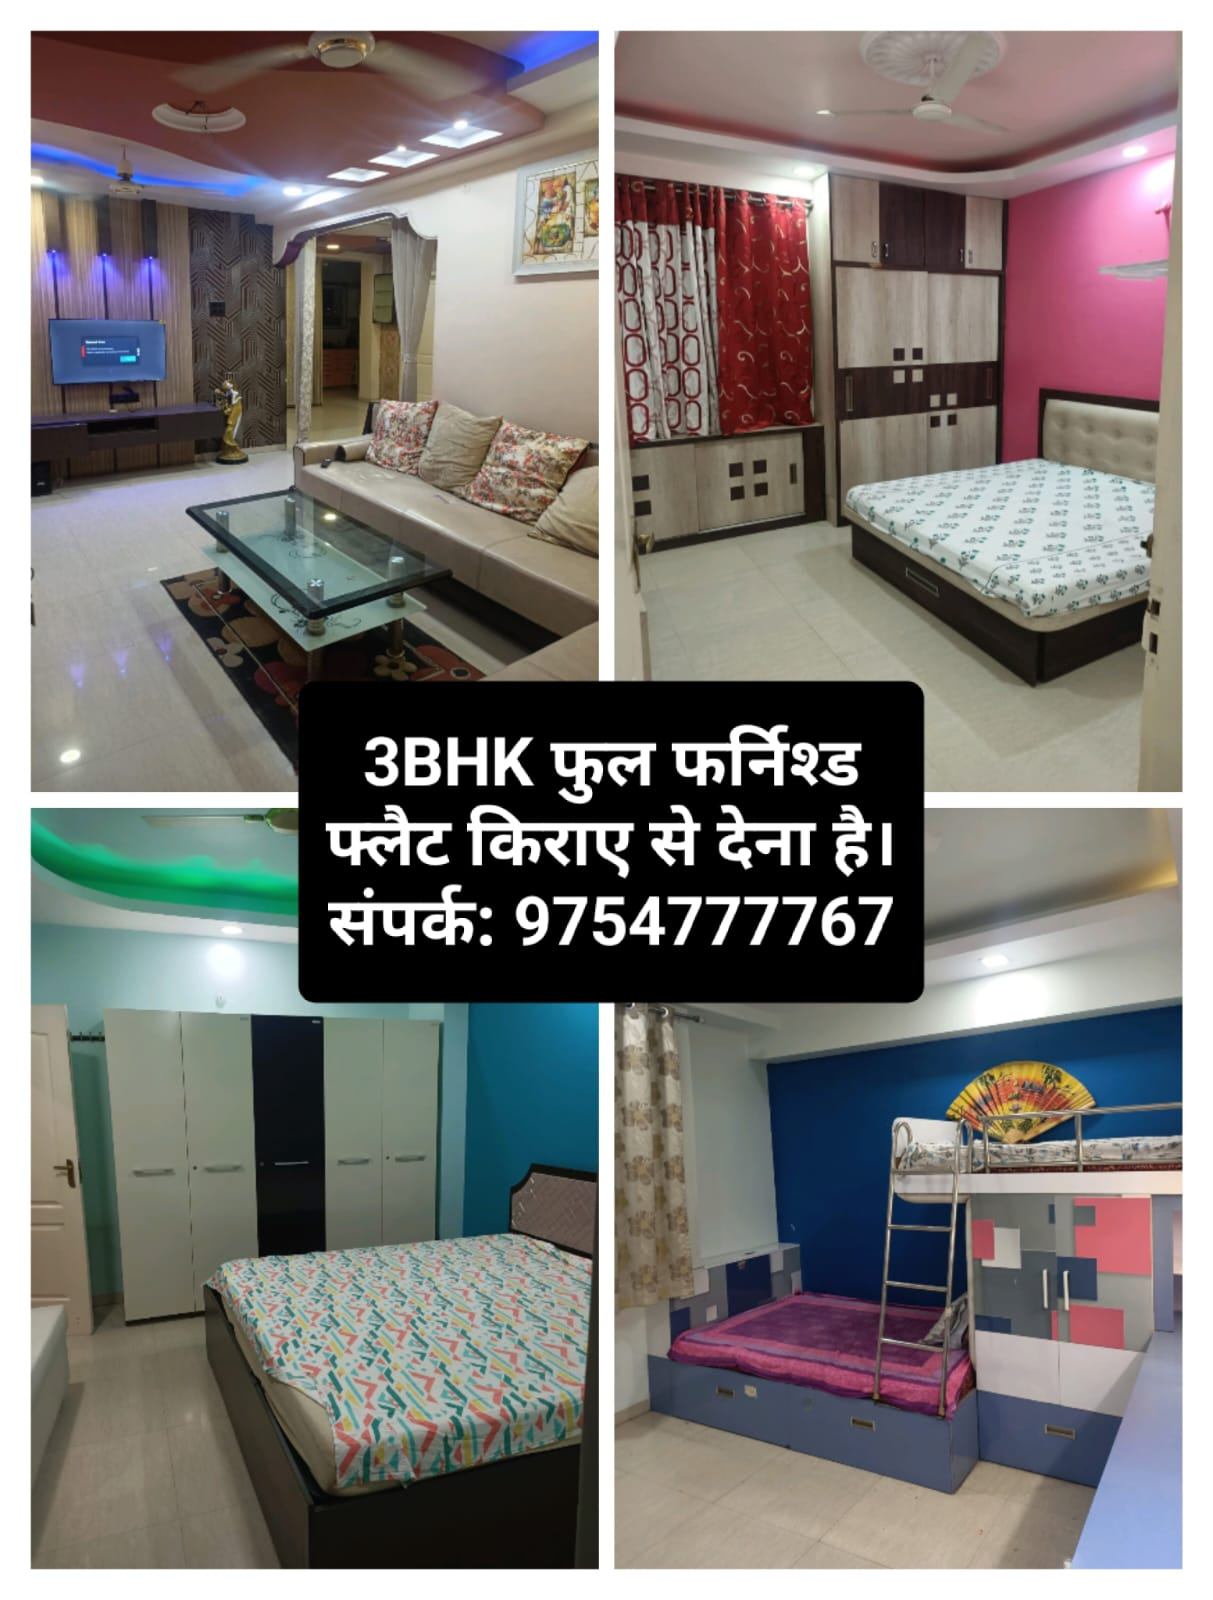 3 Bed/ 3 Bath Rent Apartment/ Flat; 1,700 sq. ft. carpet area, Furnished for rent @bombay hospital.